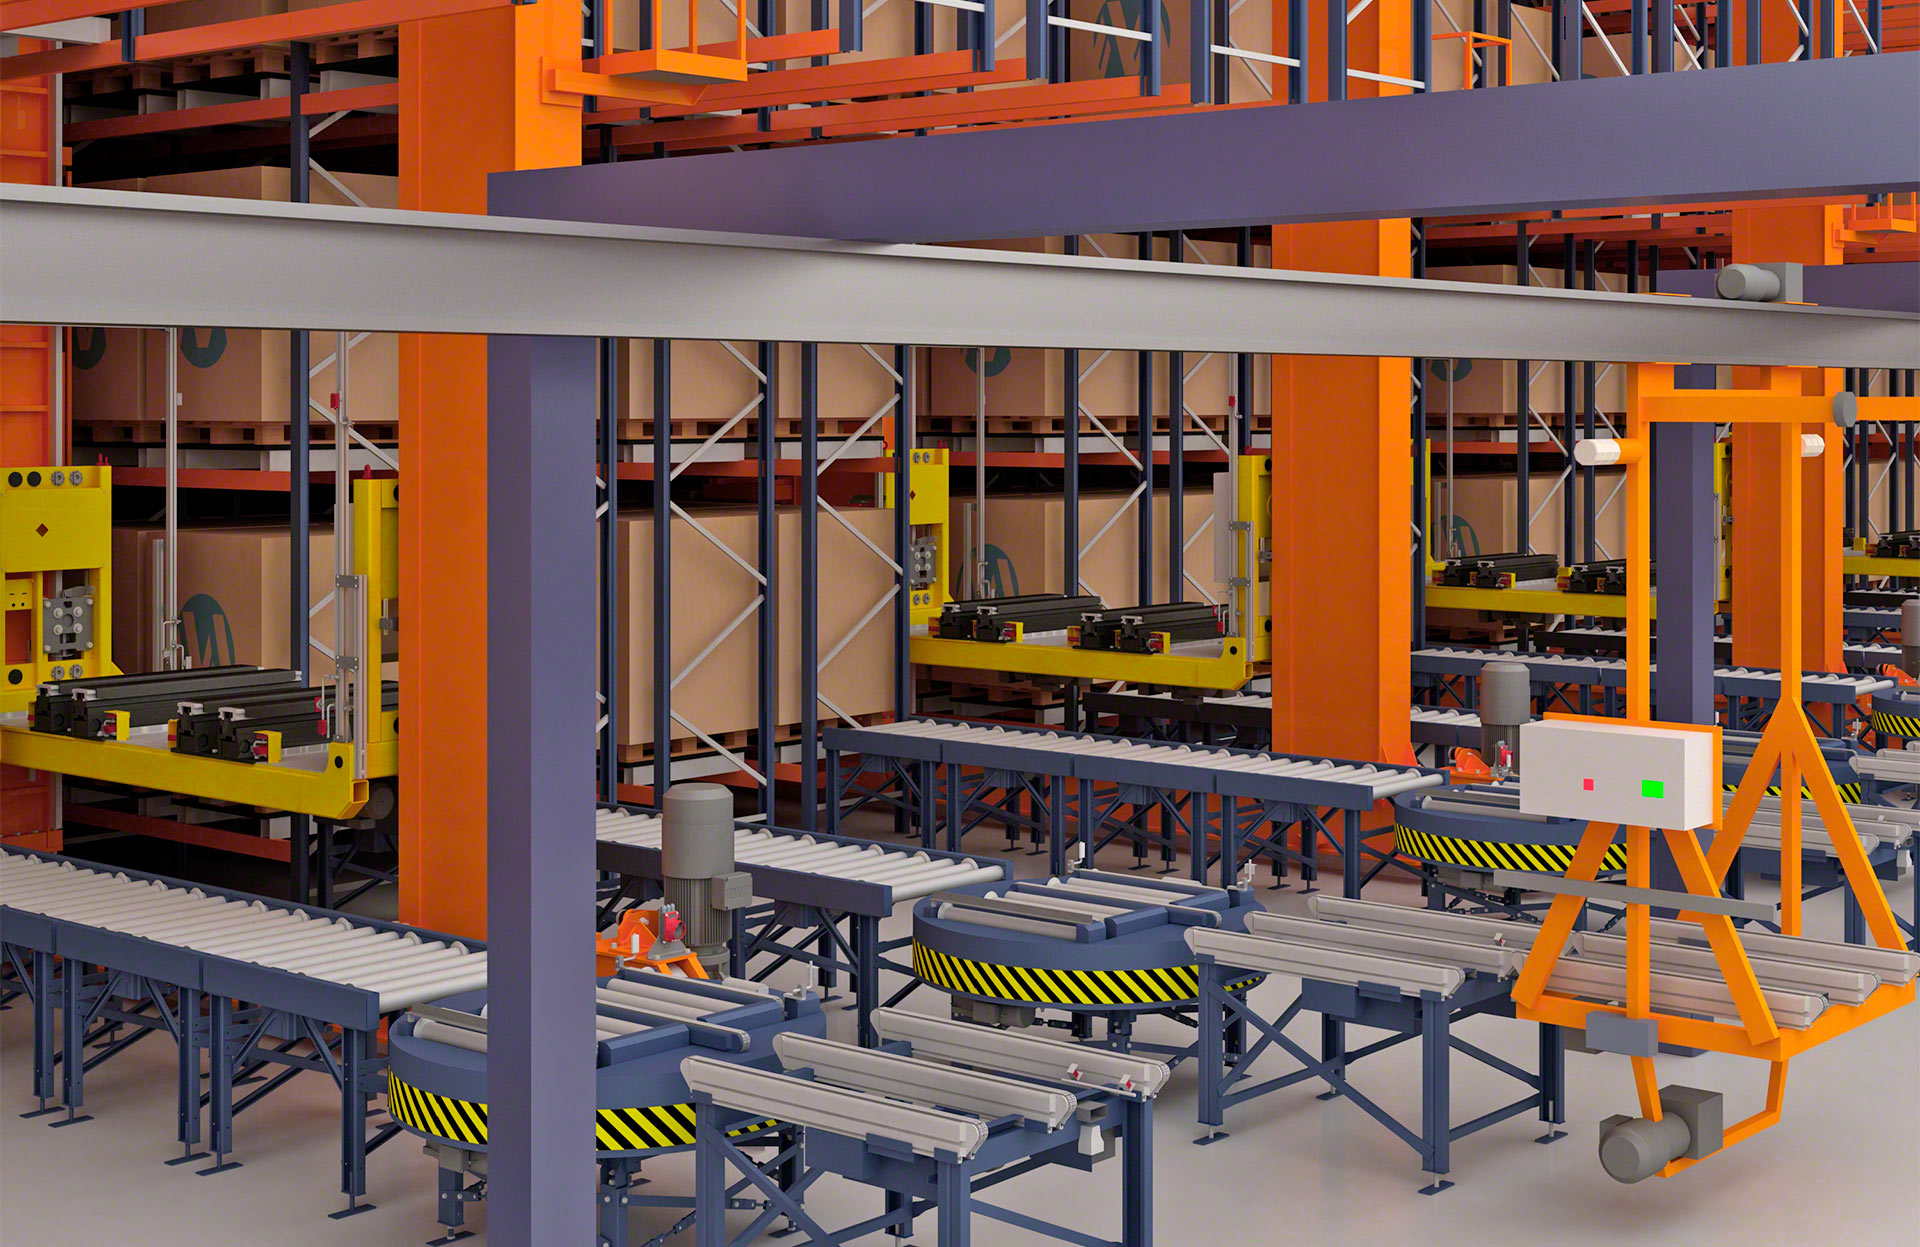 Trolleys use an on-board conveyor to transfer pallets at loading and unloading stations